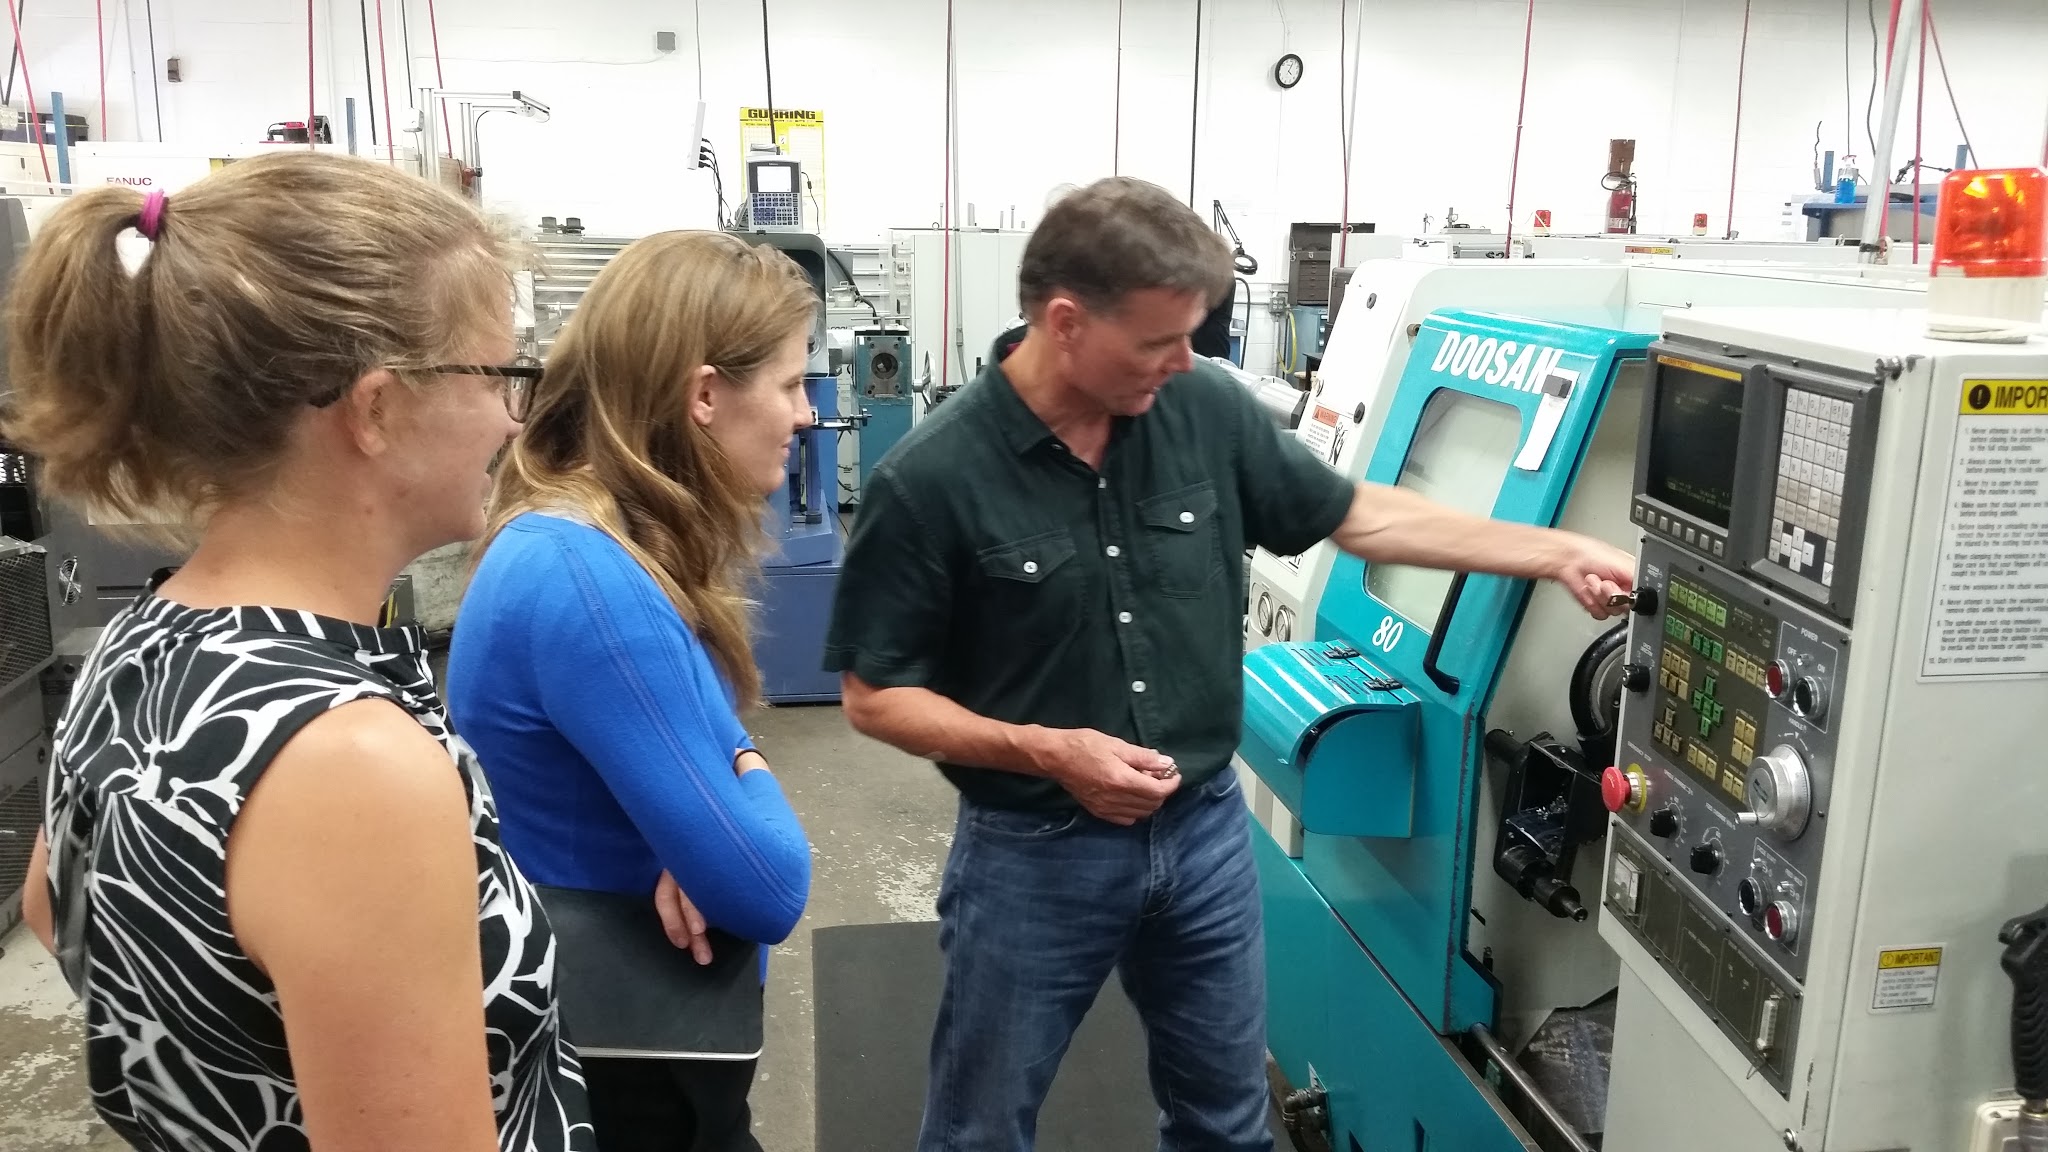 CIC Staffers Shellie Cohen (left) and Julia Hansen (center) watch CCG's Mark Flannigan (right) demonstrate on a milling machine.